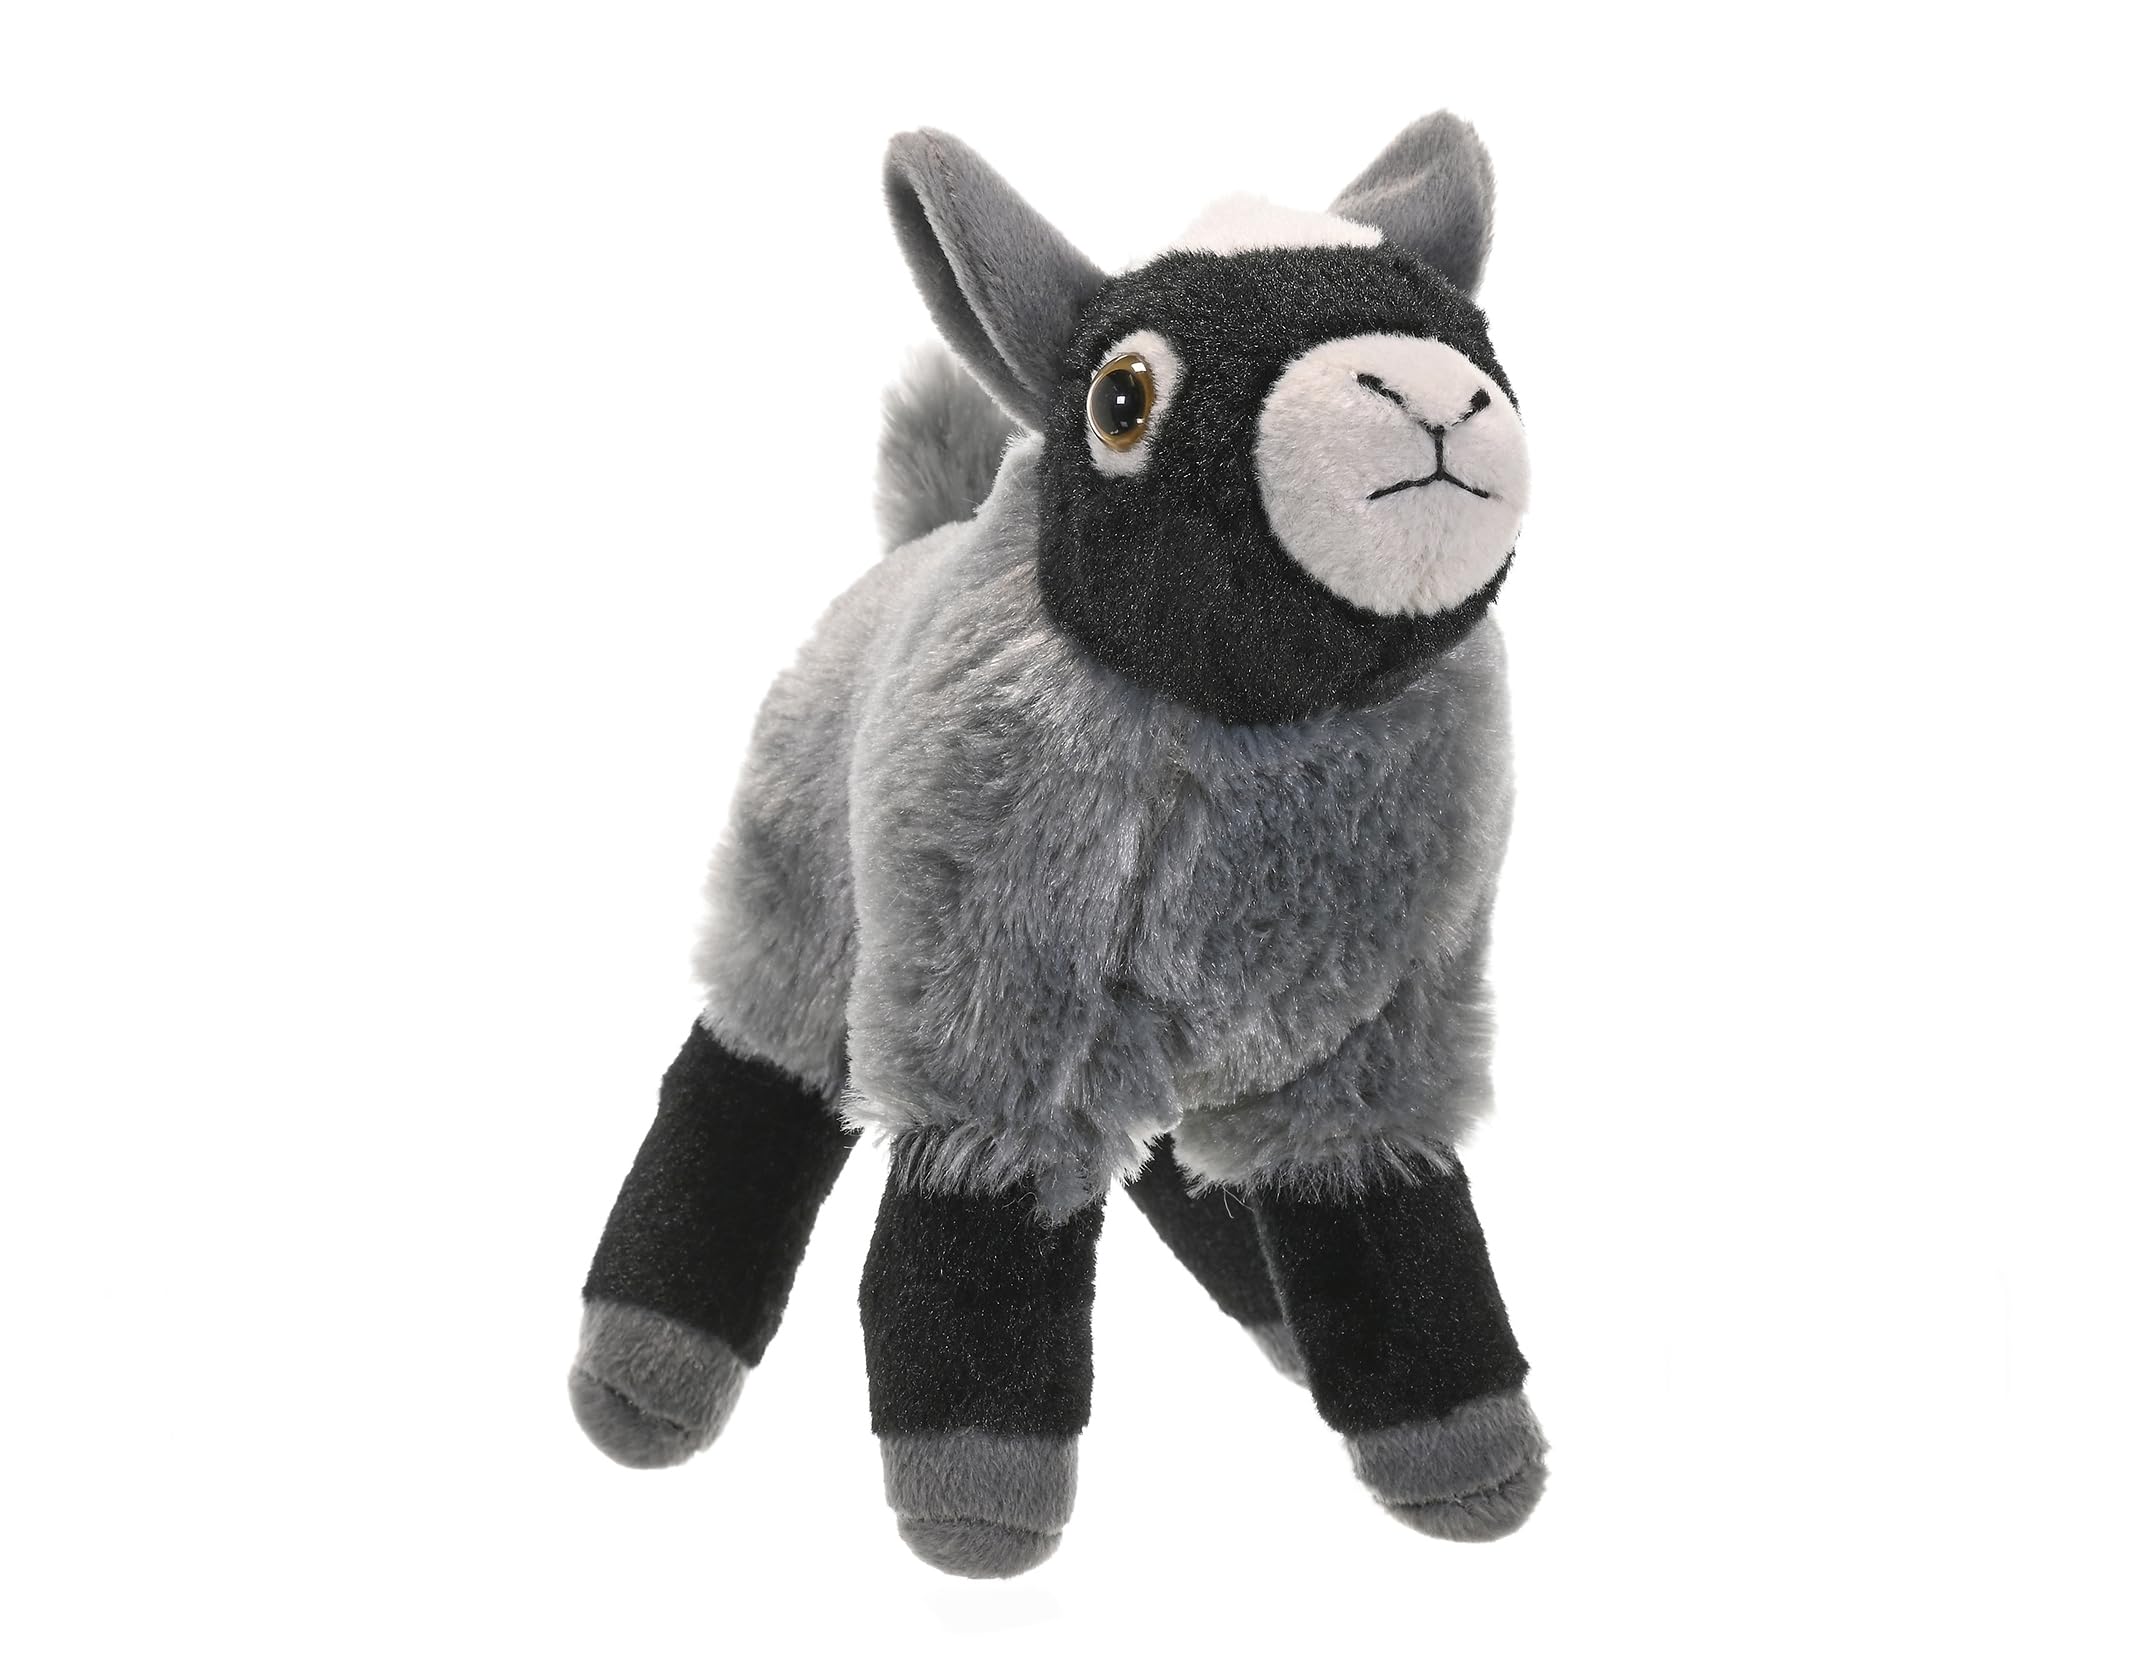 8" Wild Republic Goat Plush $6.40 + Free Shipping w/ Prime or on orders over $35